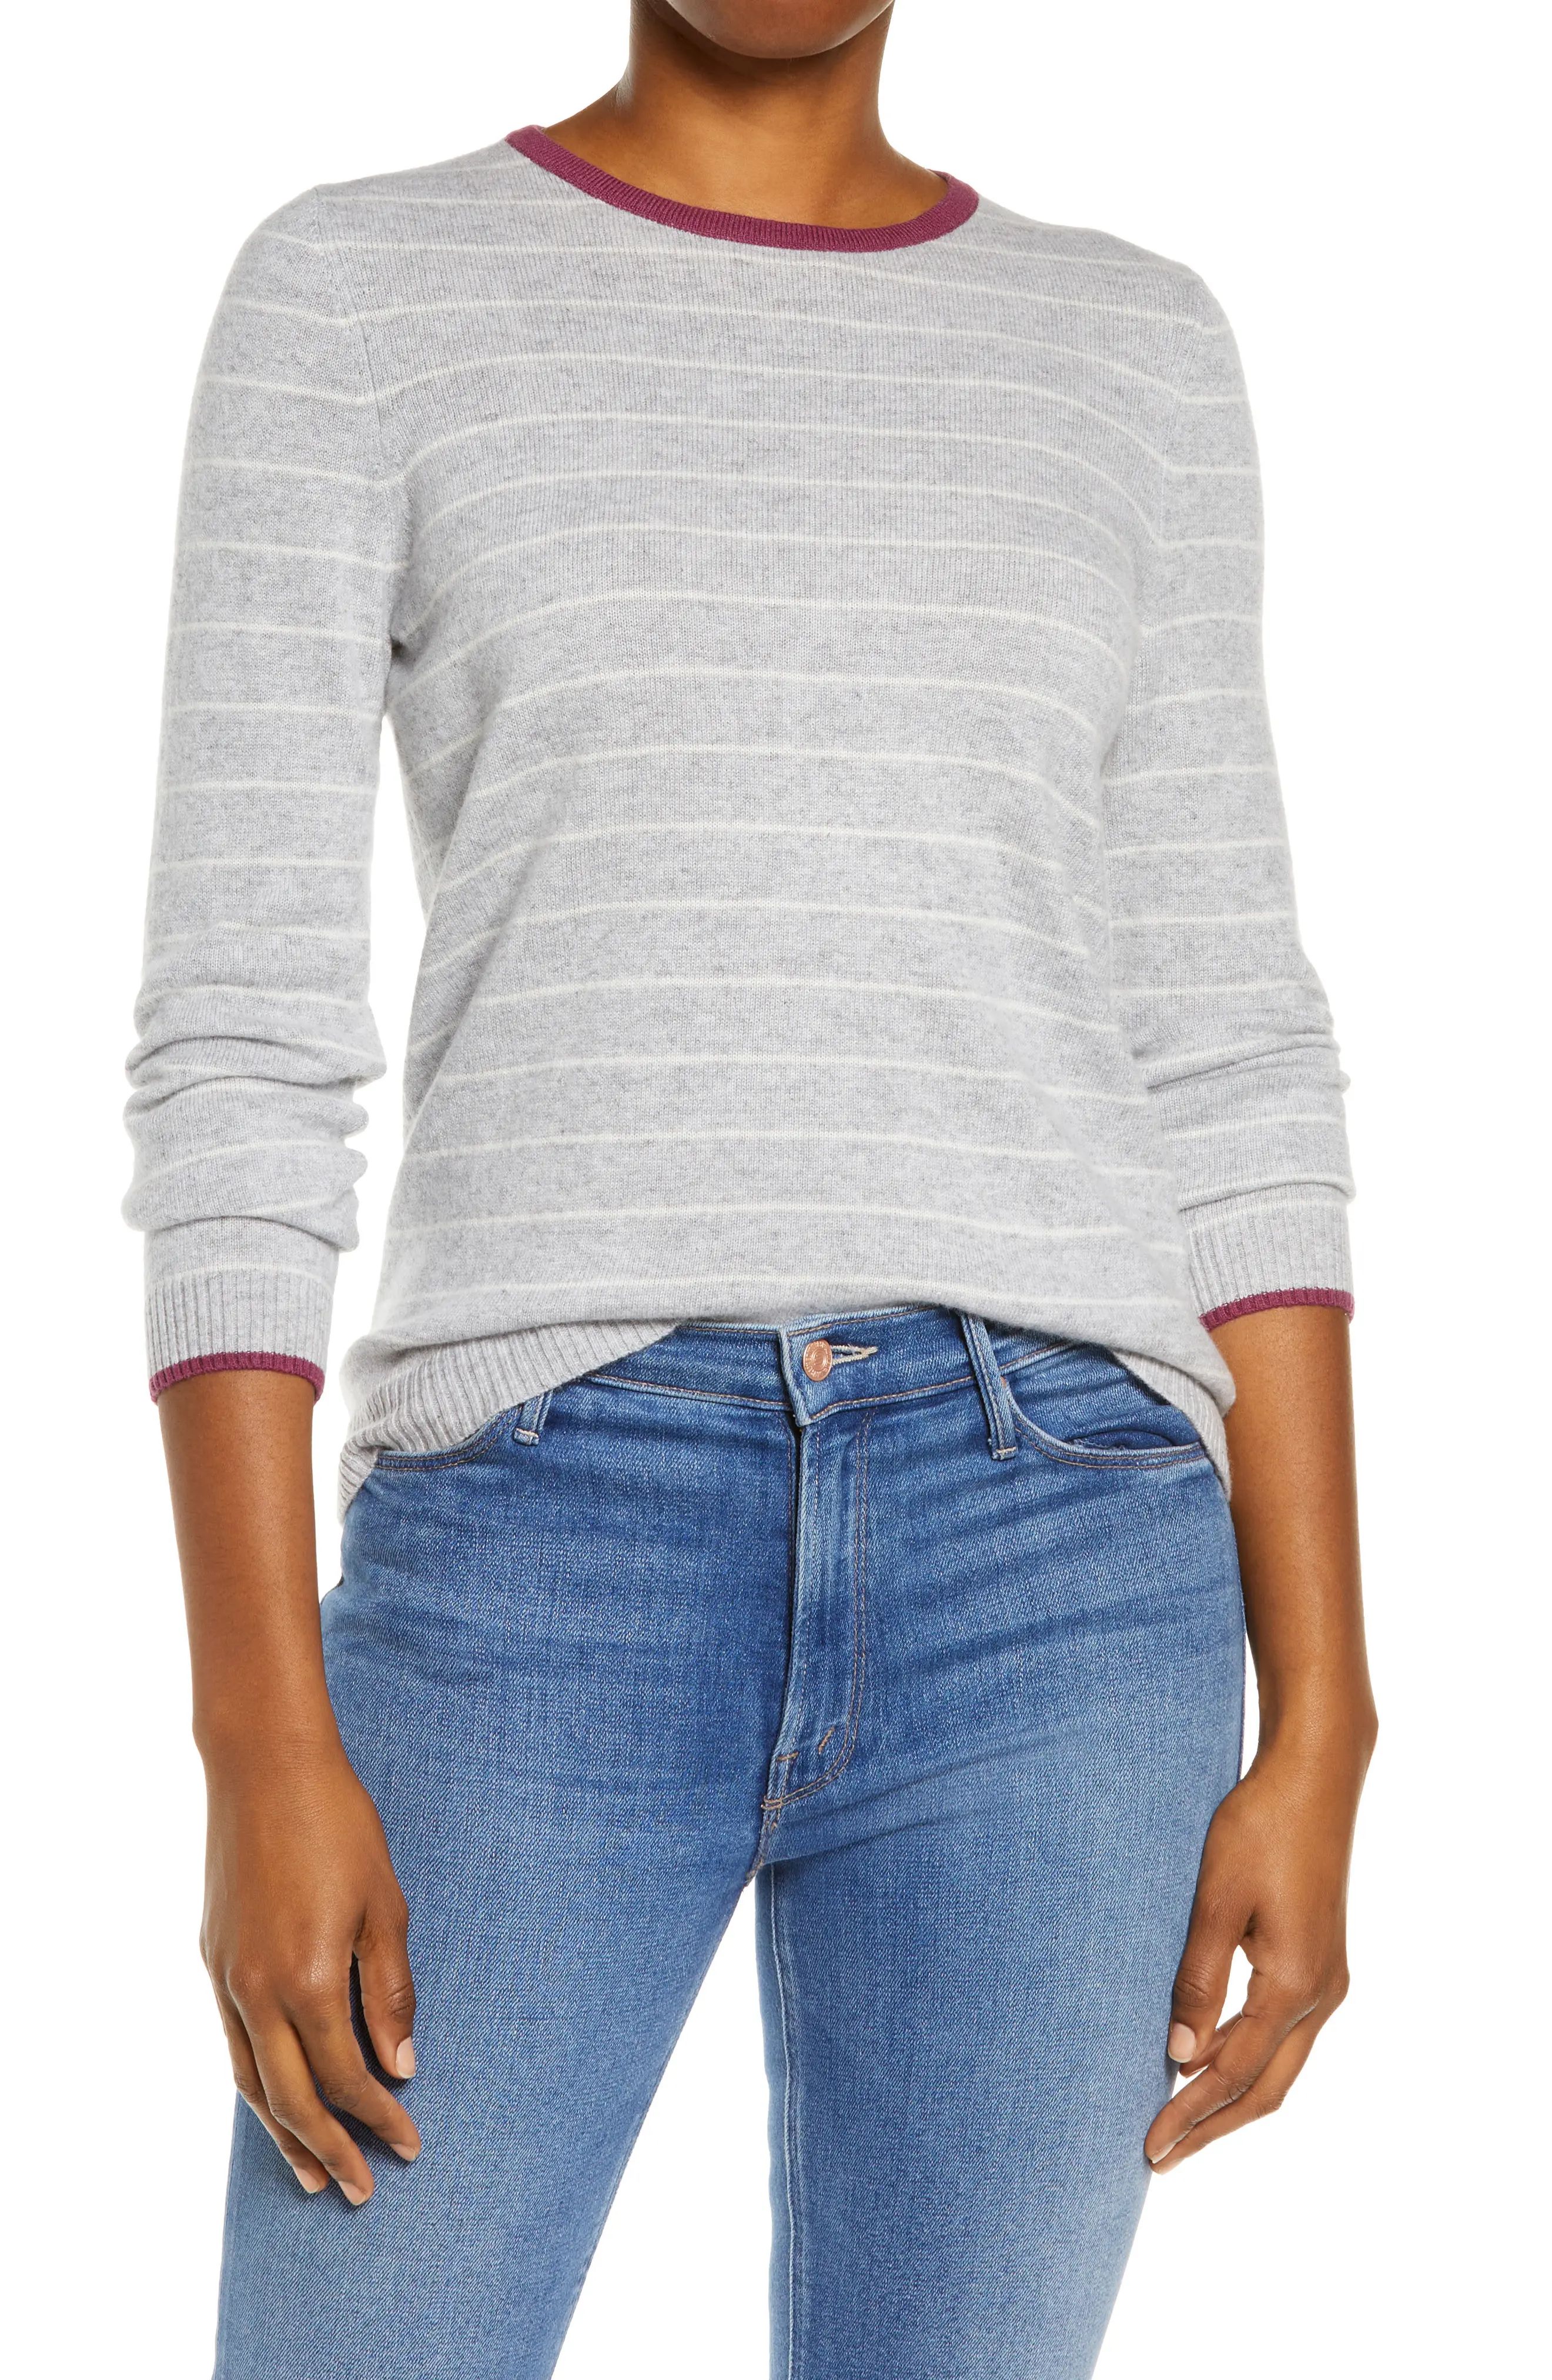 L.L.Bean Classic Cashmere Stripe Sweater in Gray Heather at Nordstrom, Size X-Large | Nordstrom